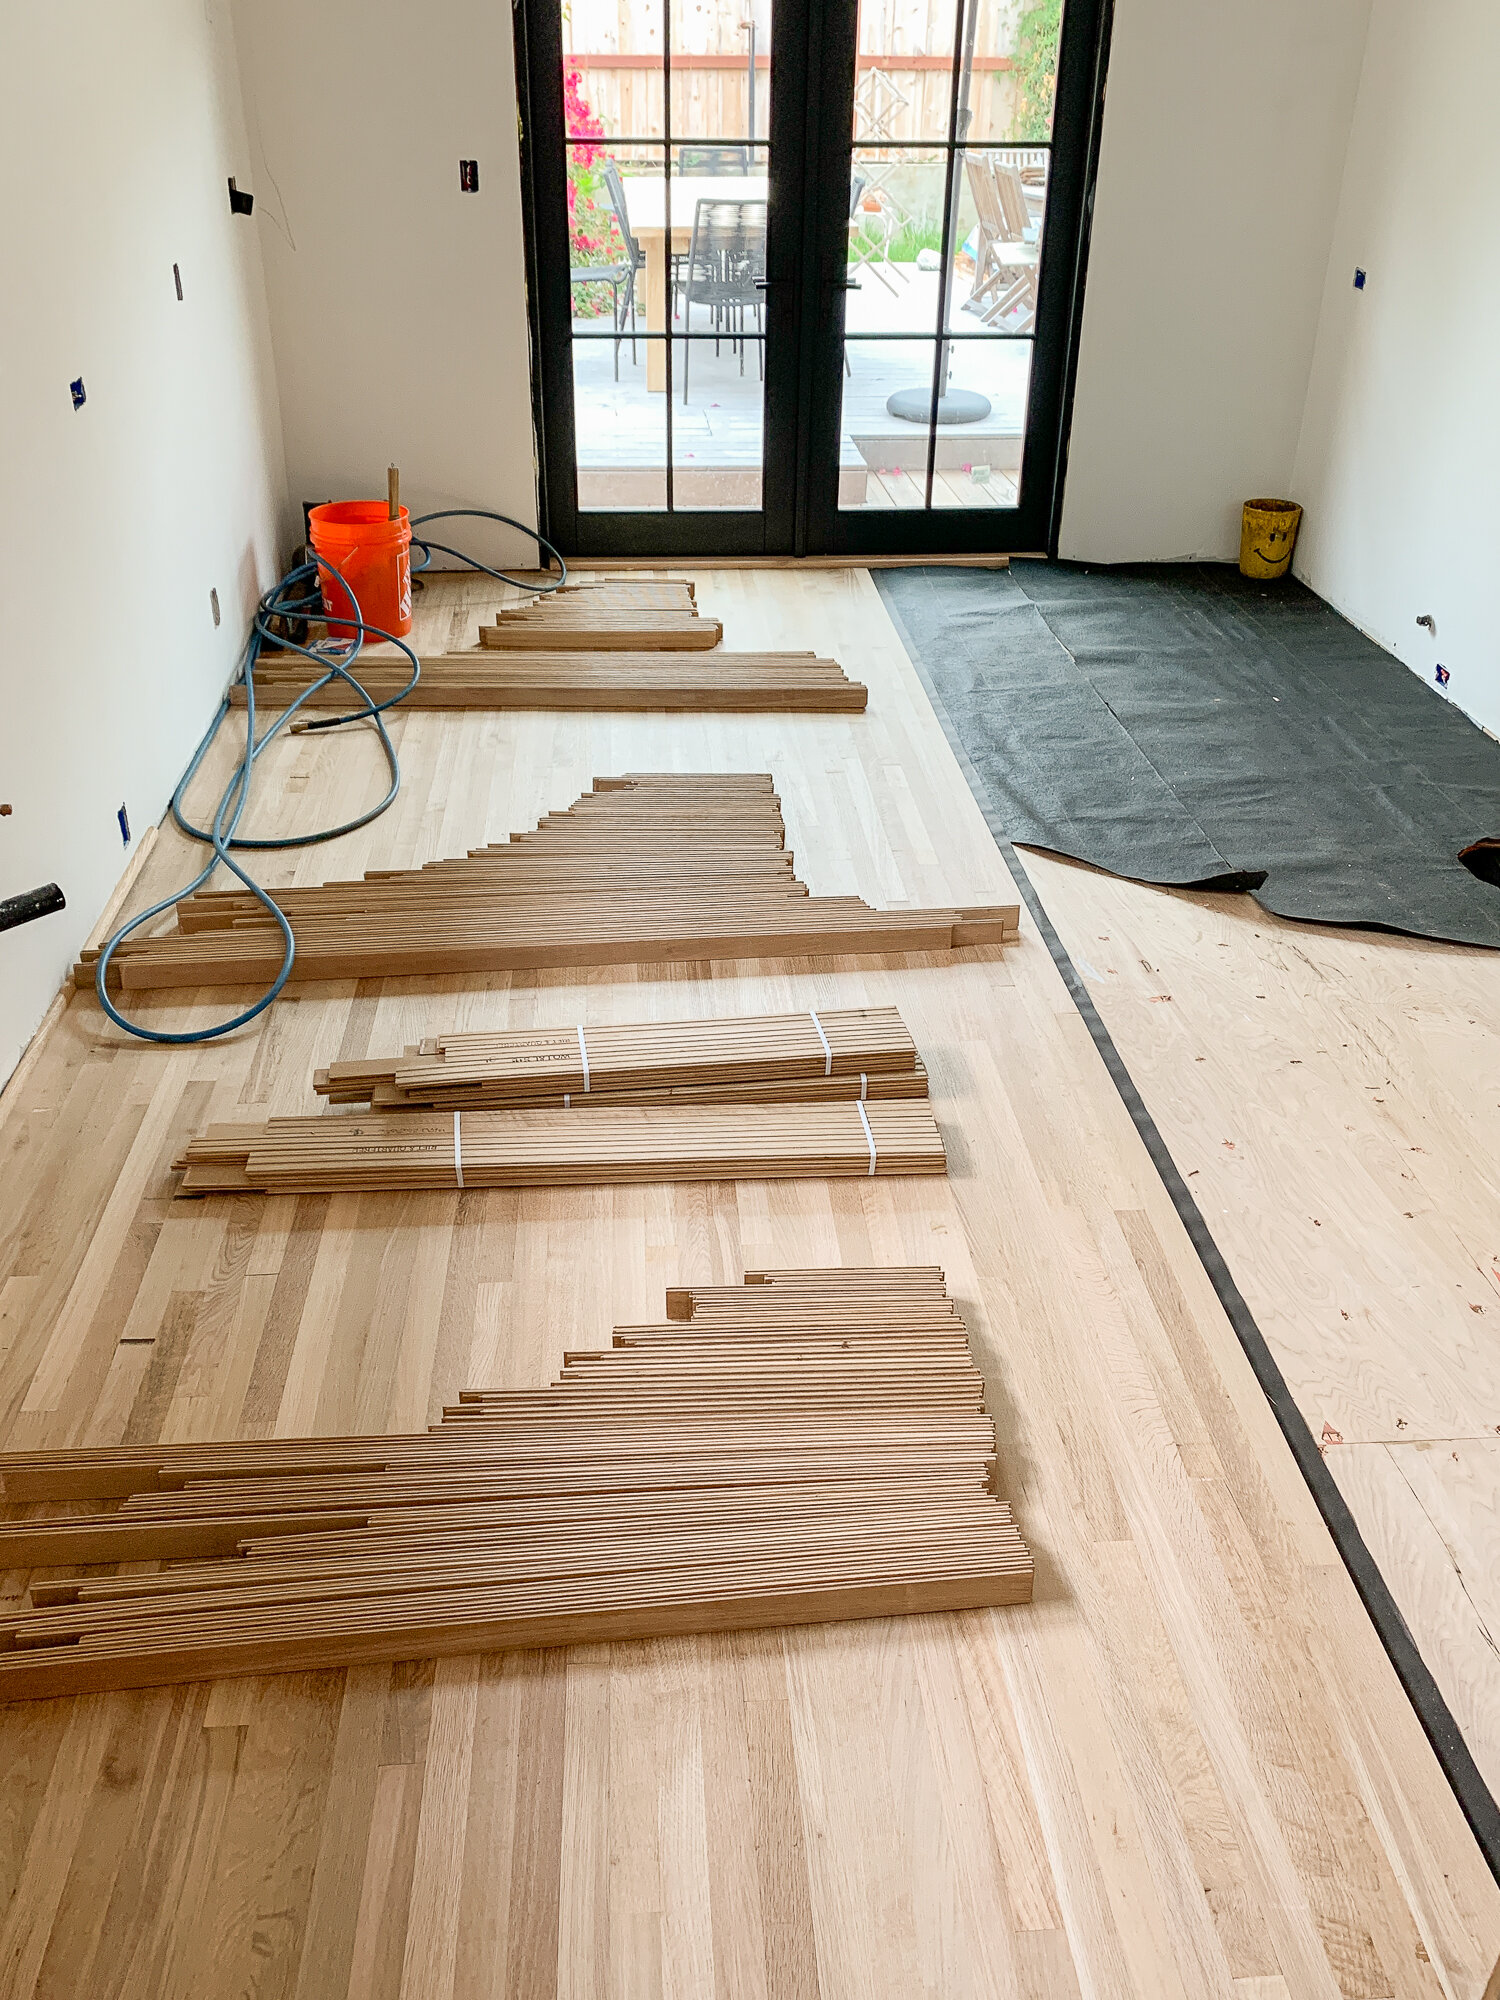 Installing New Hardwood Floors in Our Old Home — The Gold Hive